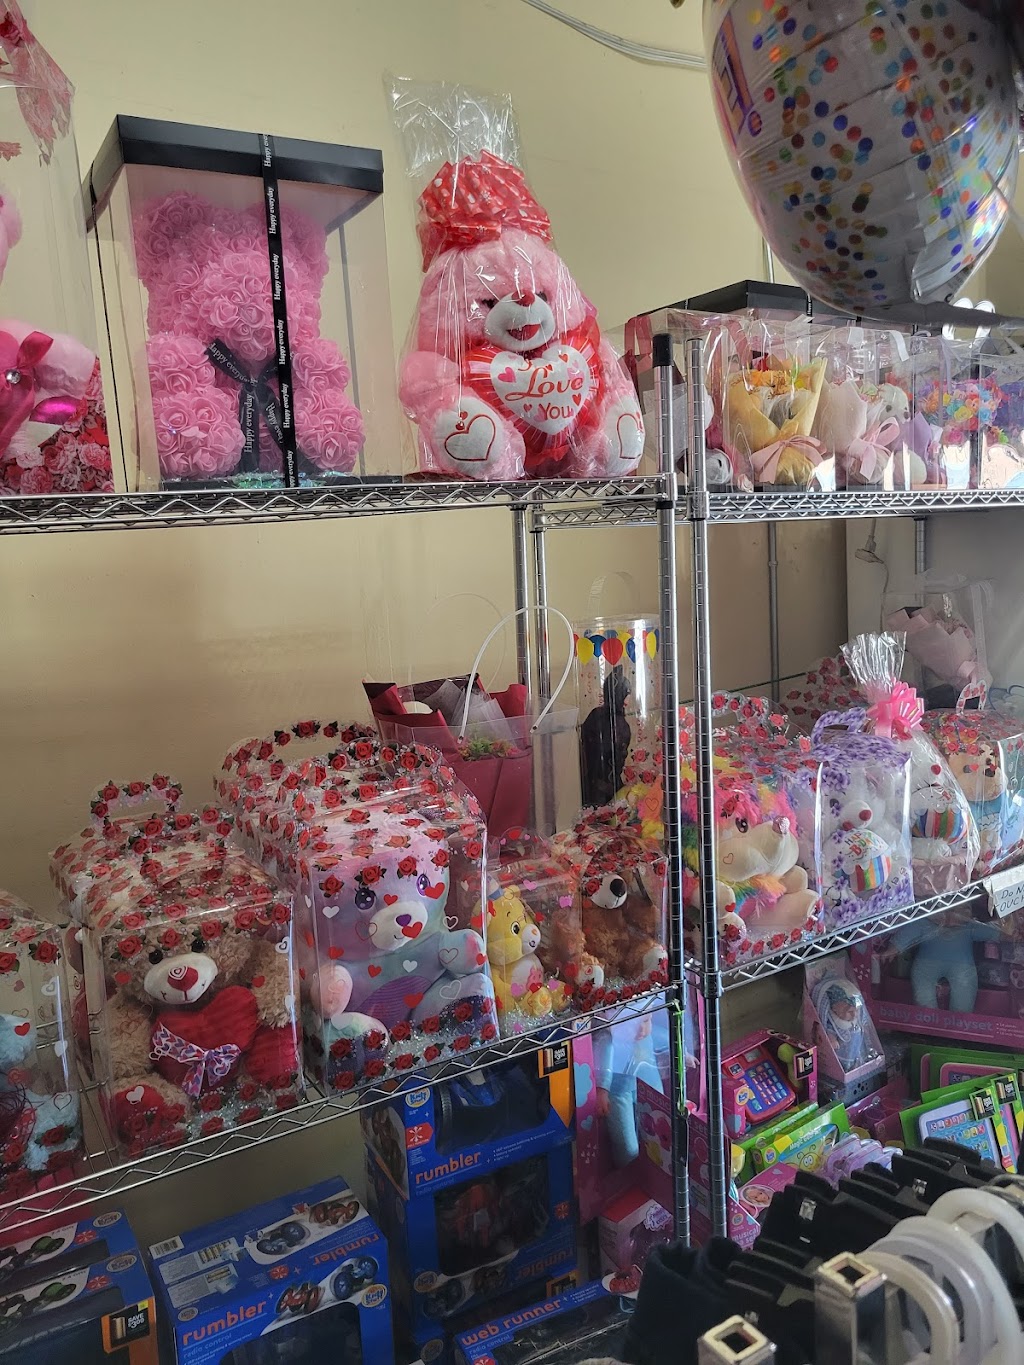 Lupitas Gift And Party Supplies | 4126 S Hoover St, Los Angeles, CA 90037 | Phone: (323) 861-0223